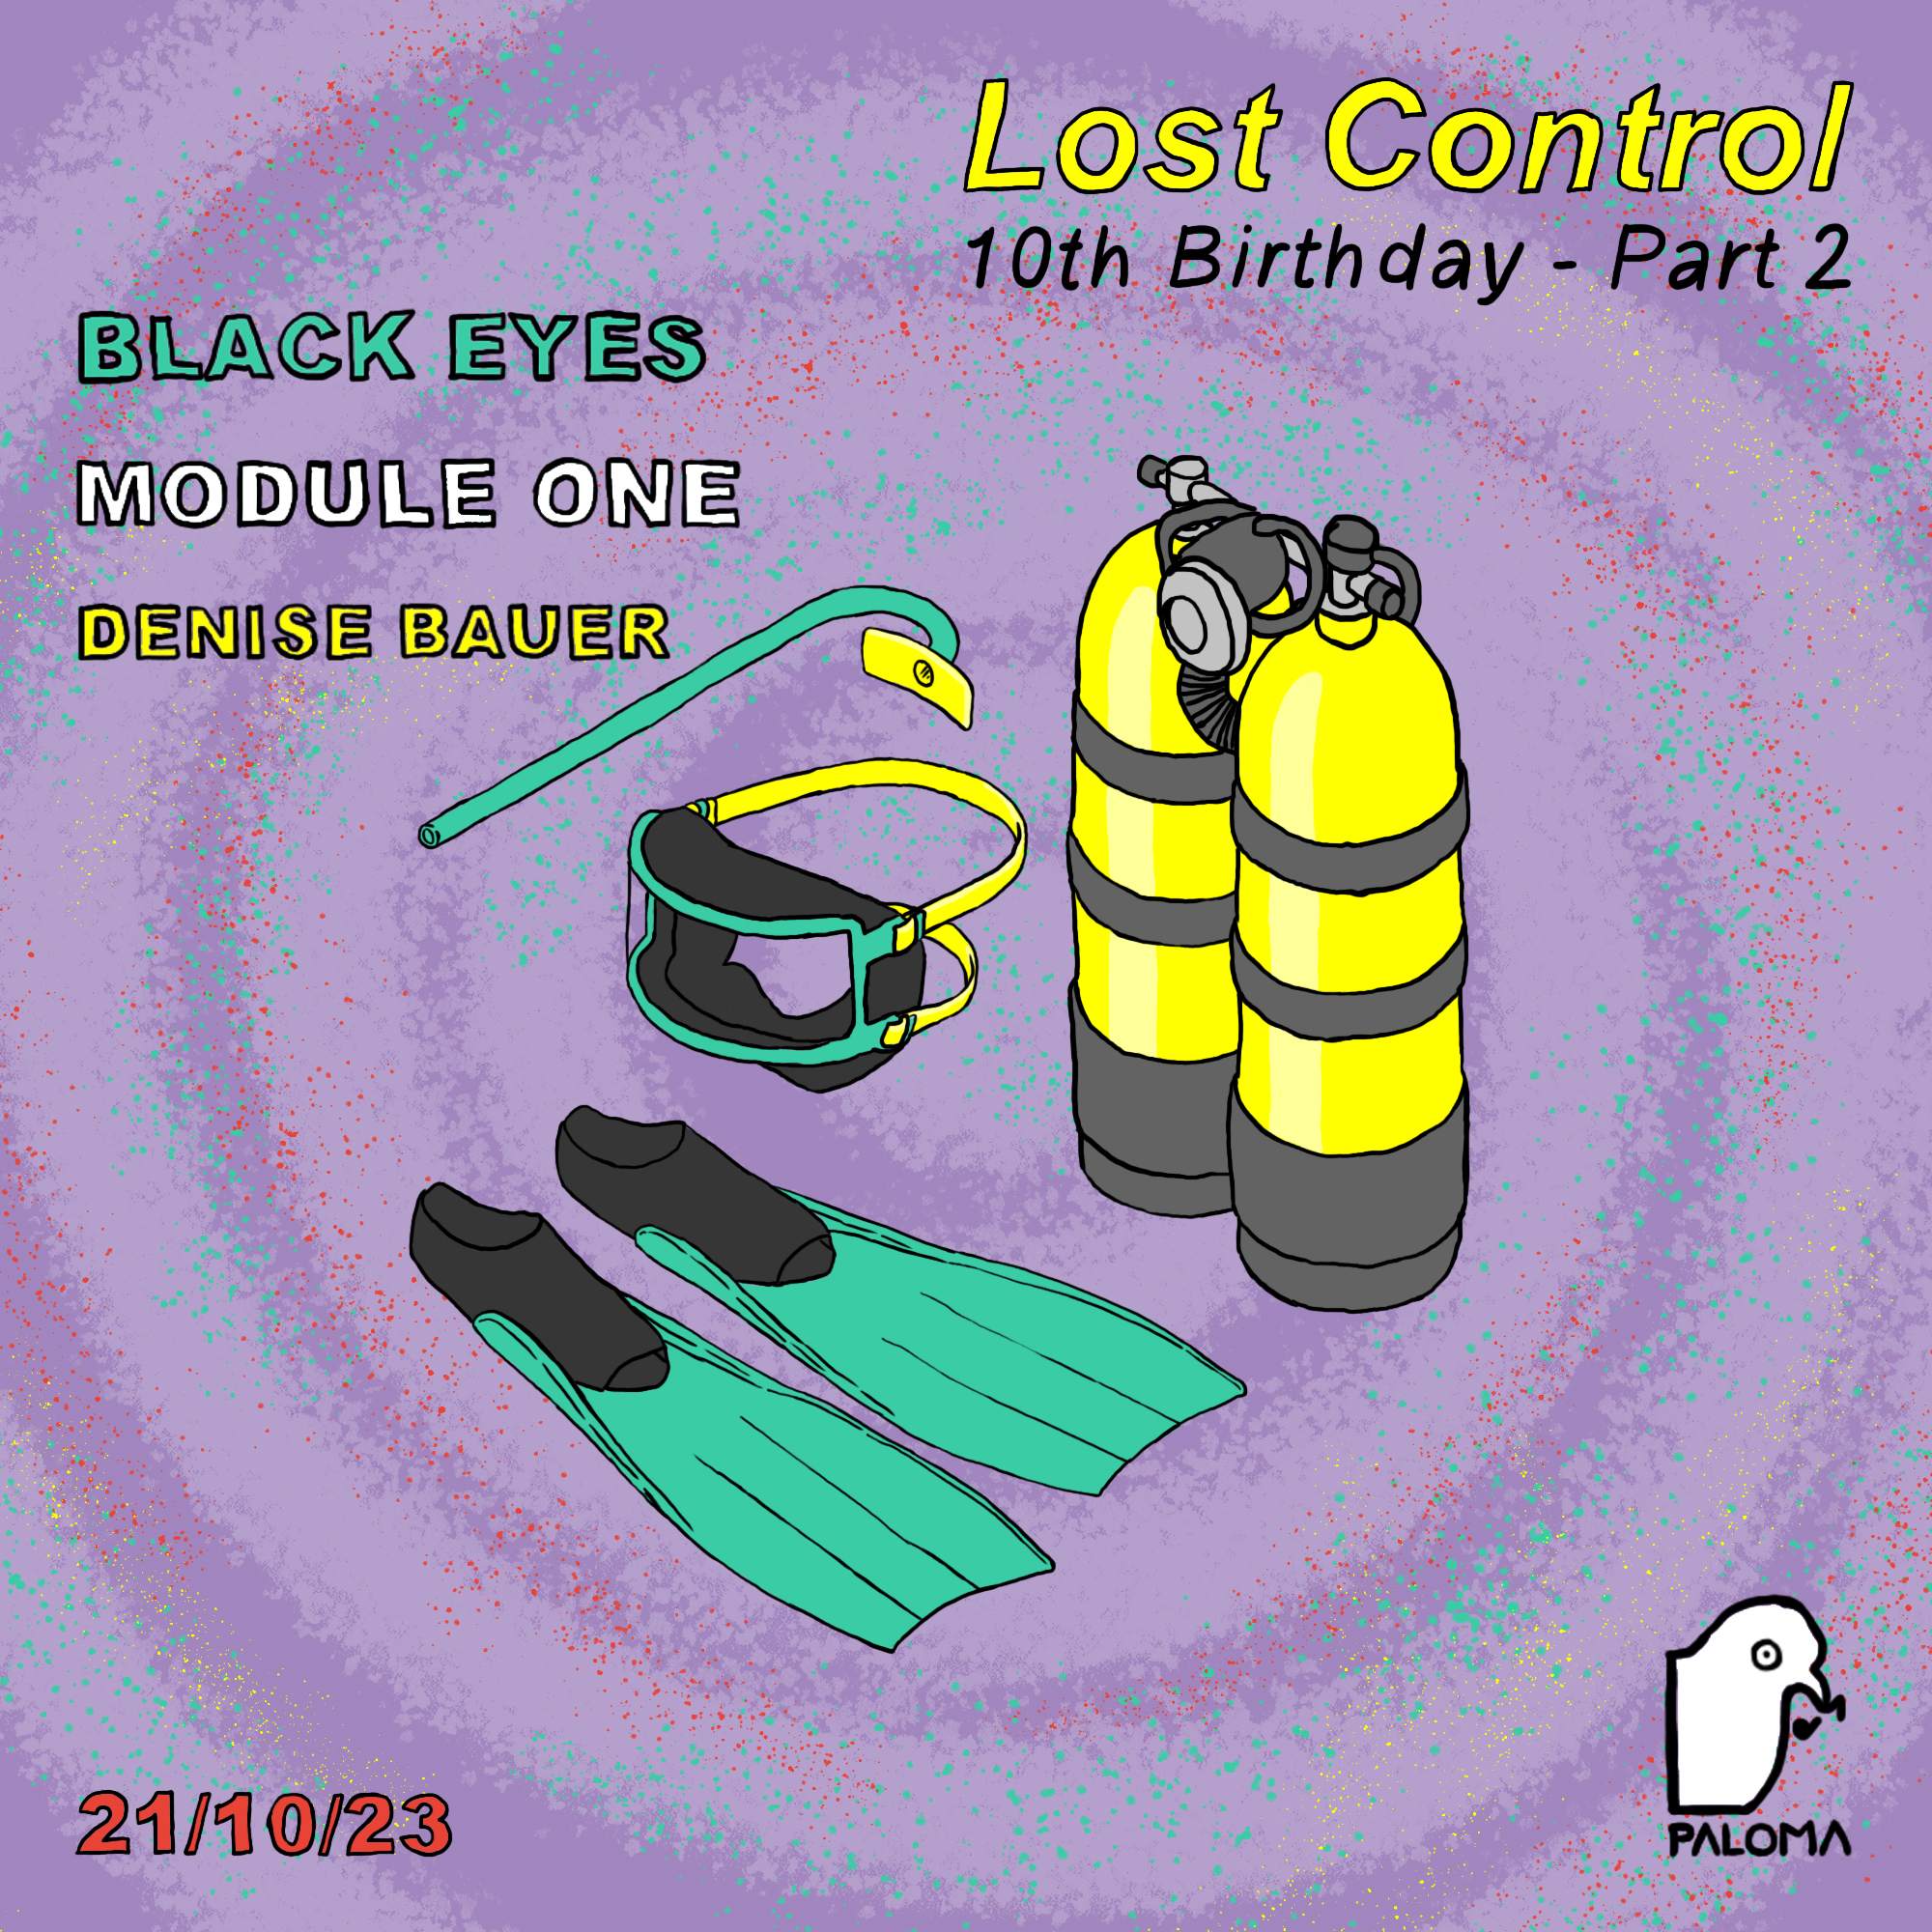 Lost Control 10th Birthday - Part 2 with Black Eyes, Module One + Denise Bauer - Página frontal